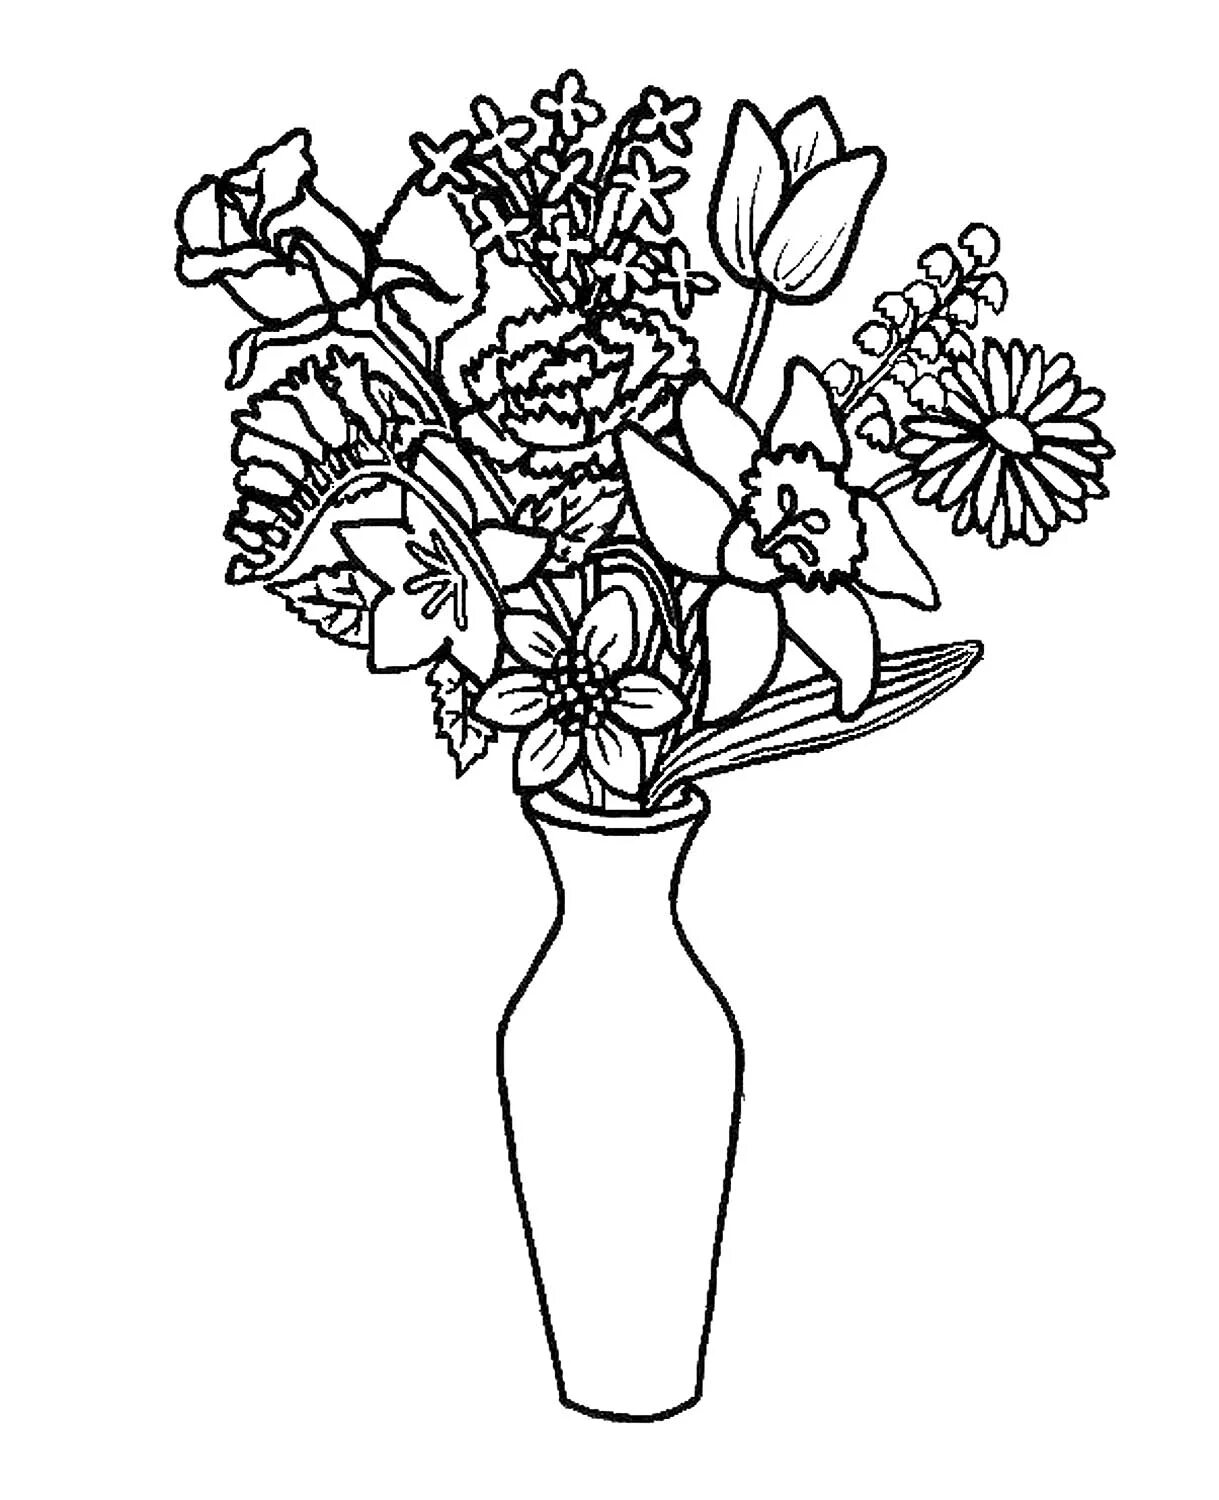 A bouquet of flowers in a vase #1